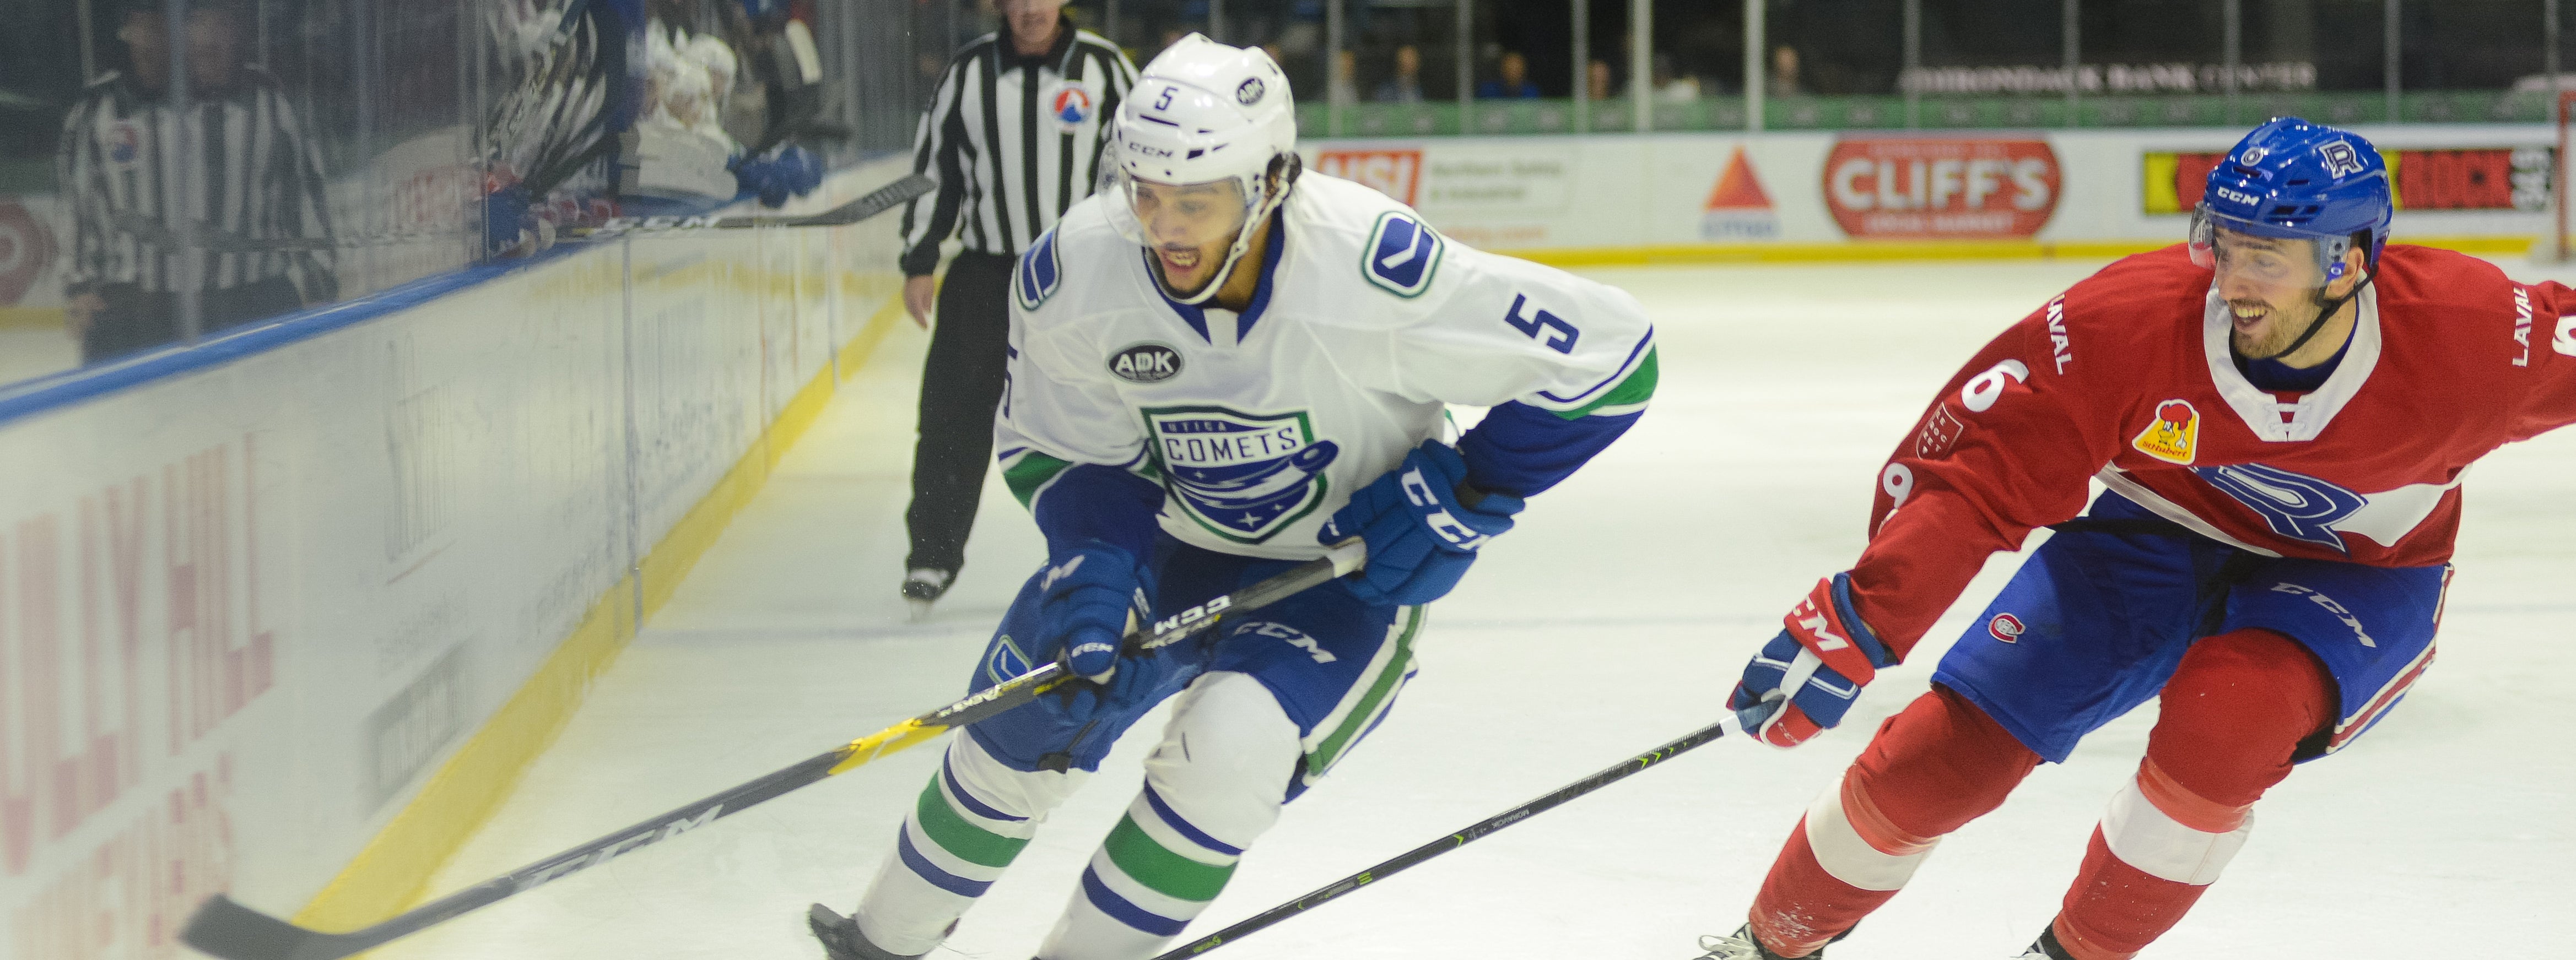 COMETS HOST ROCKET IN DIVISIONAL SHOWDOWN